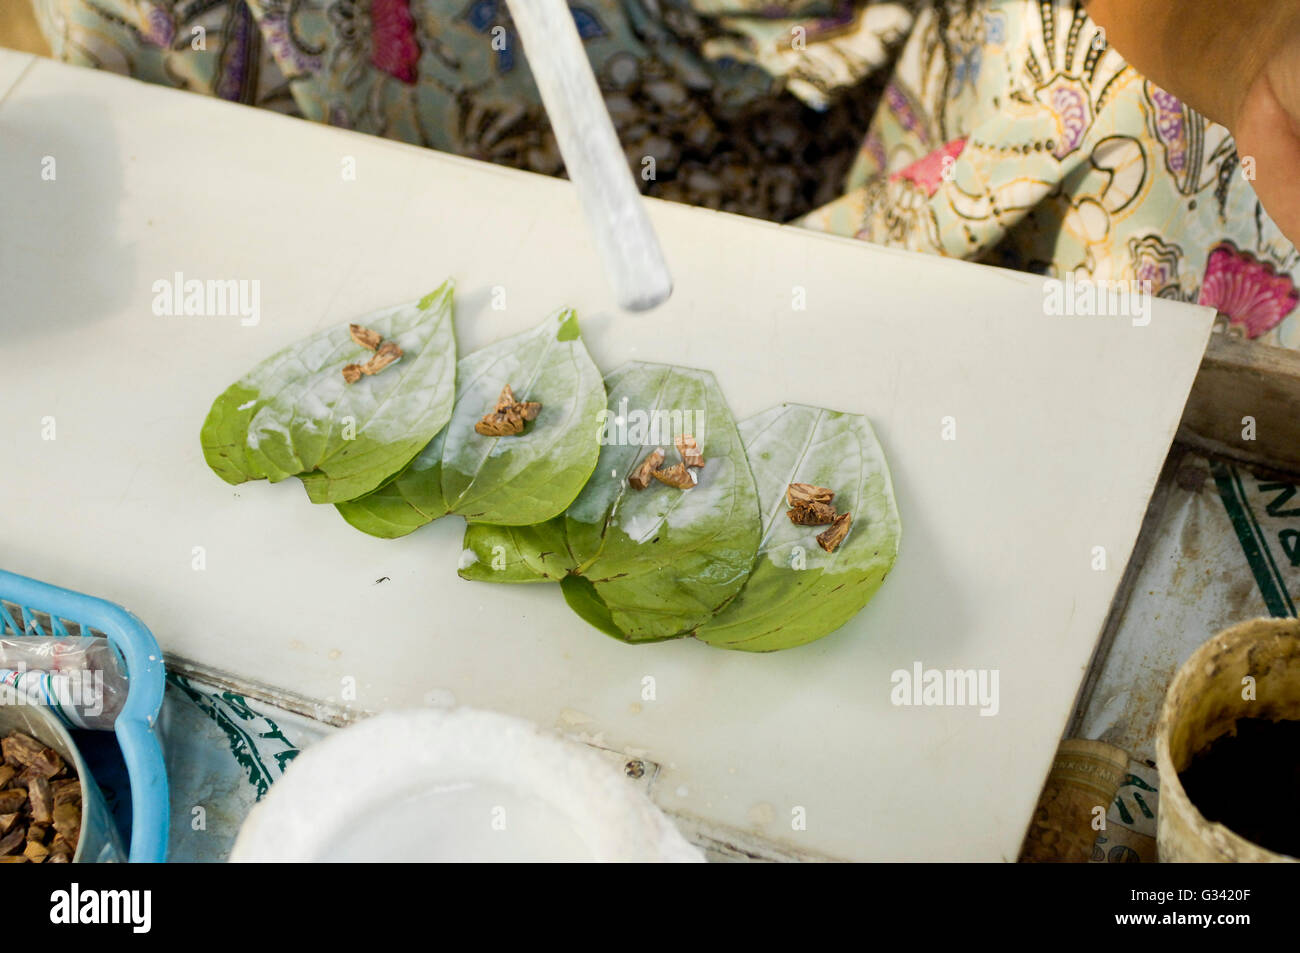 A paan vendor preparing a mixture of tobacco and areca nut on a betel leaf. Stock Photo